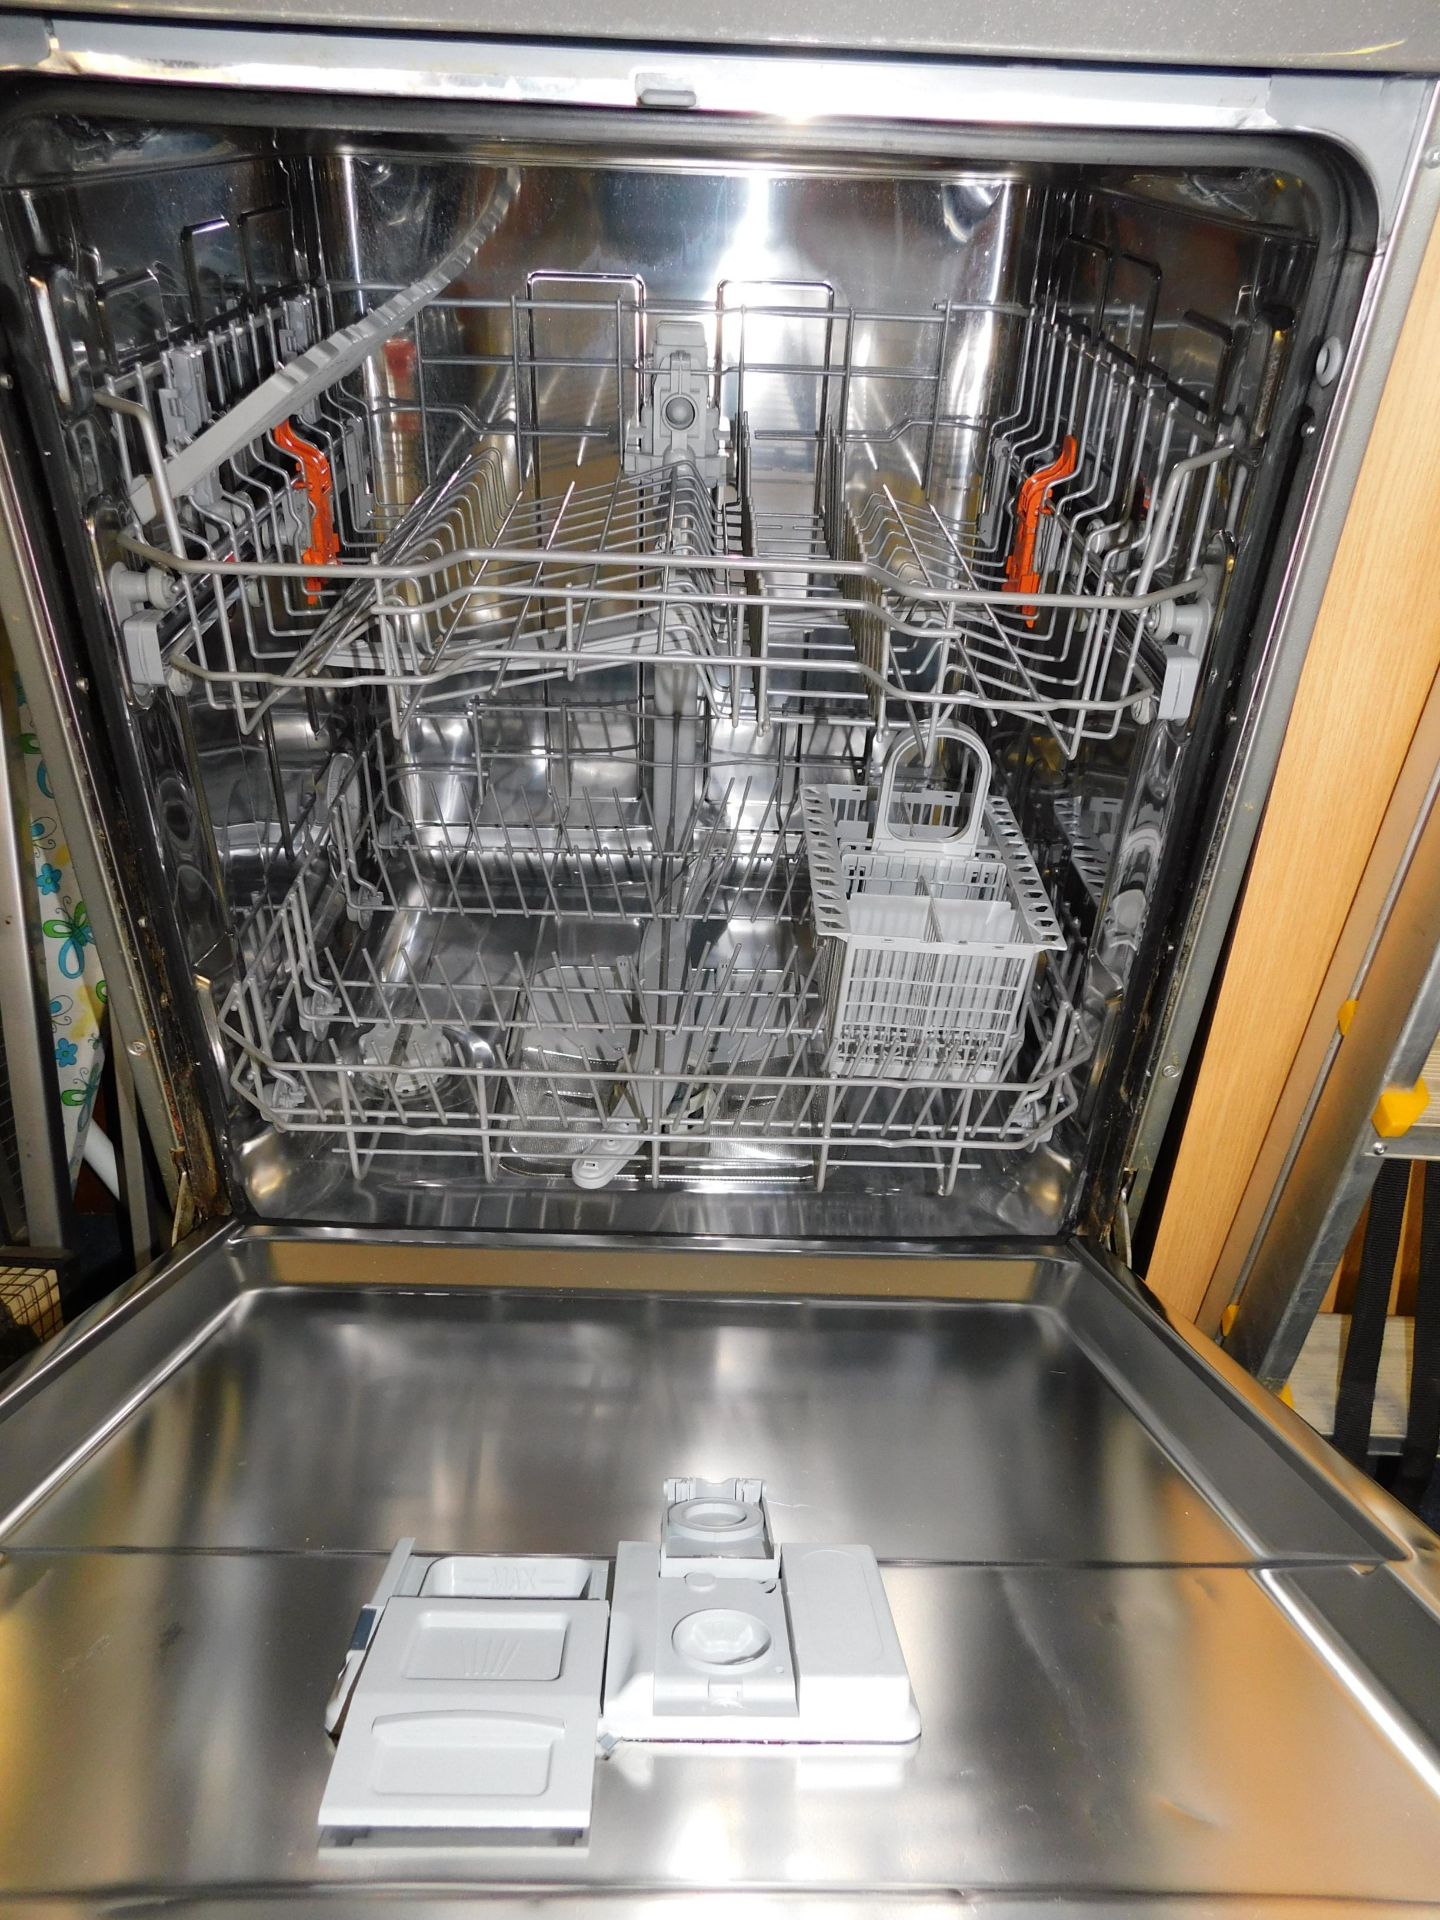 Hotpoint Futura Dishwasher (Location Stockport. Please Refer to General Notes) - Image 2 of 2